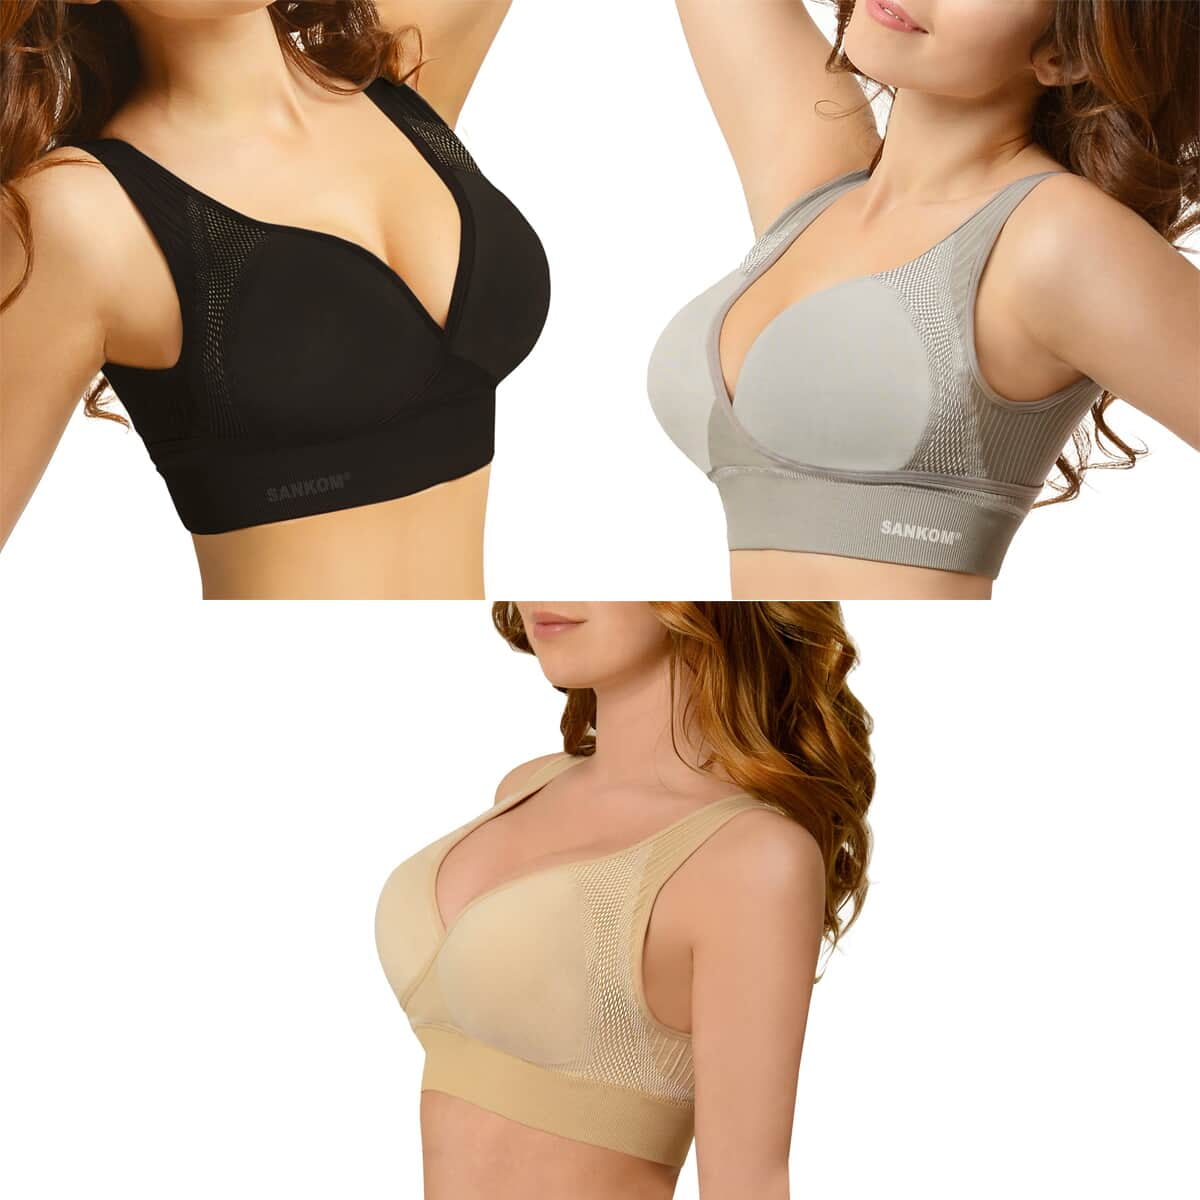 Shop LC Set of 3 SANKOM Black, Gray and Beige Color Patent Support & Posture  Bra with Aloe Vera, Bamboo and Cooling Fibers -M/L Birthday Gifts 